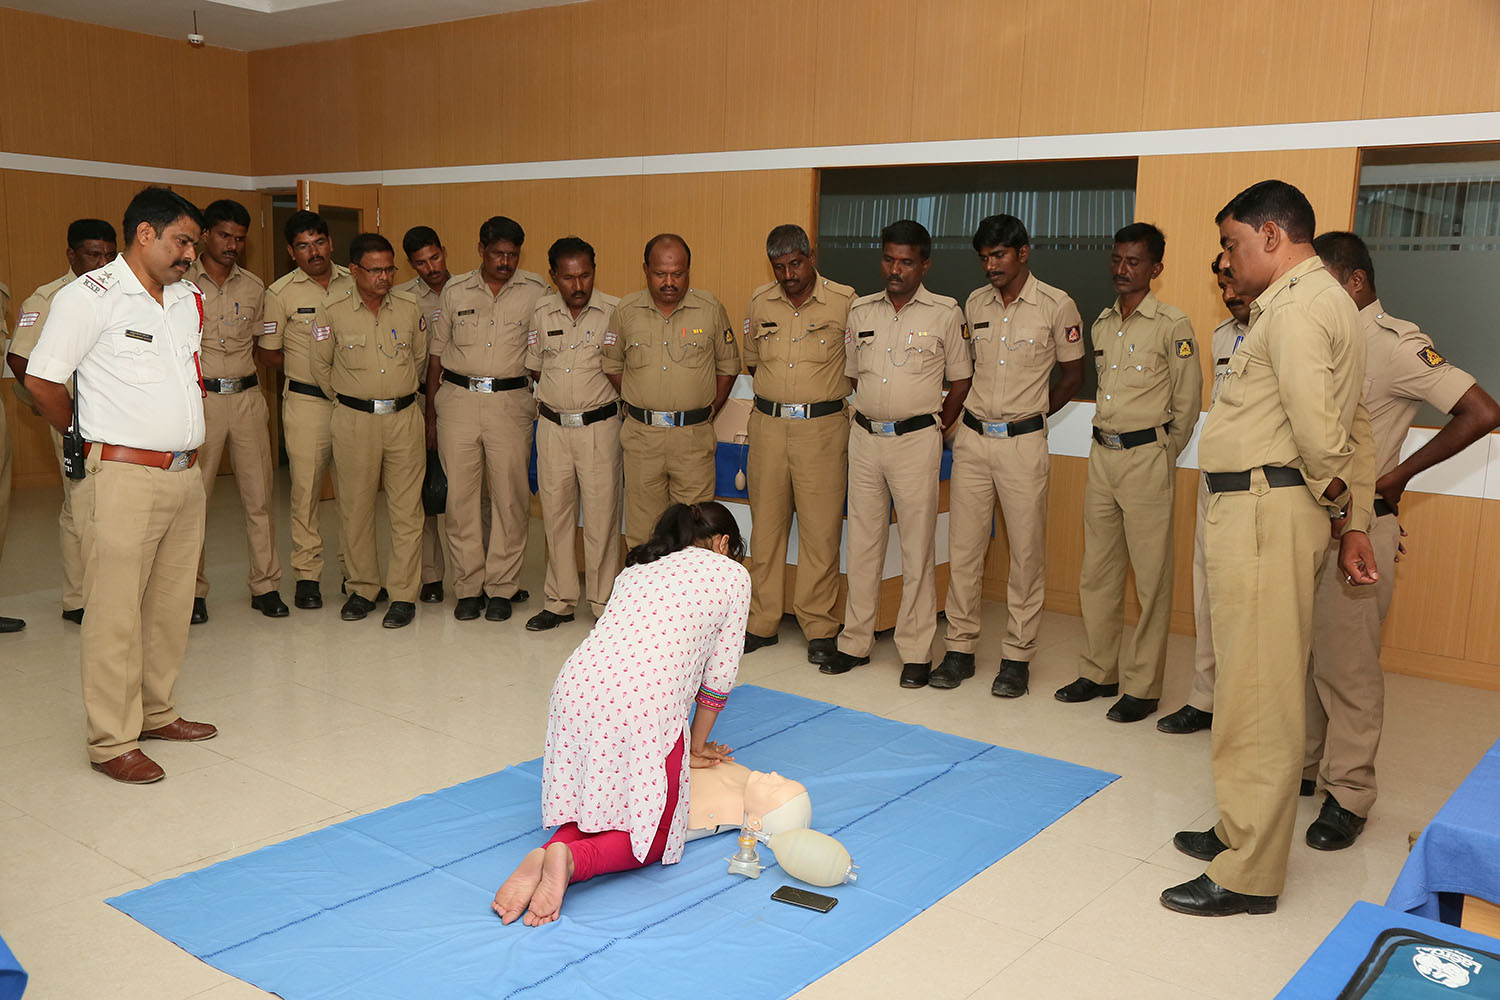 Workshop on Hands on Training on “Basic Life Support Programme” for police personnel & KSRTC Personnel